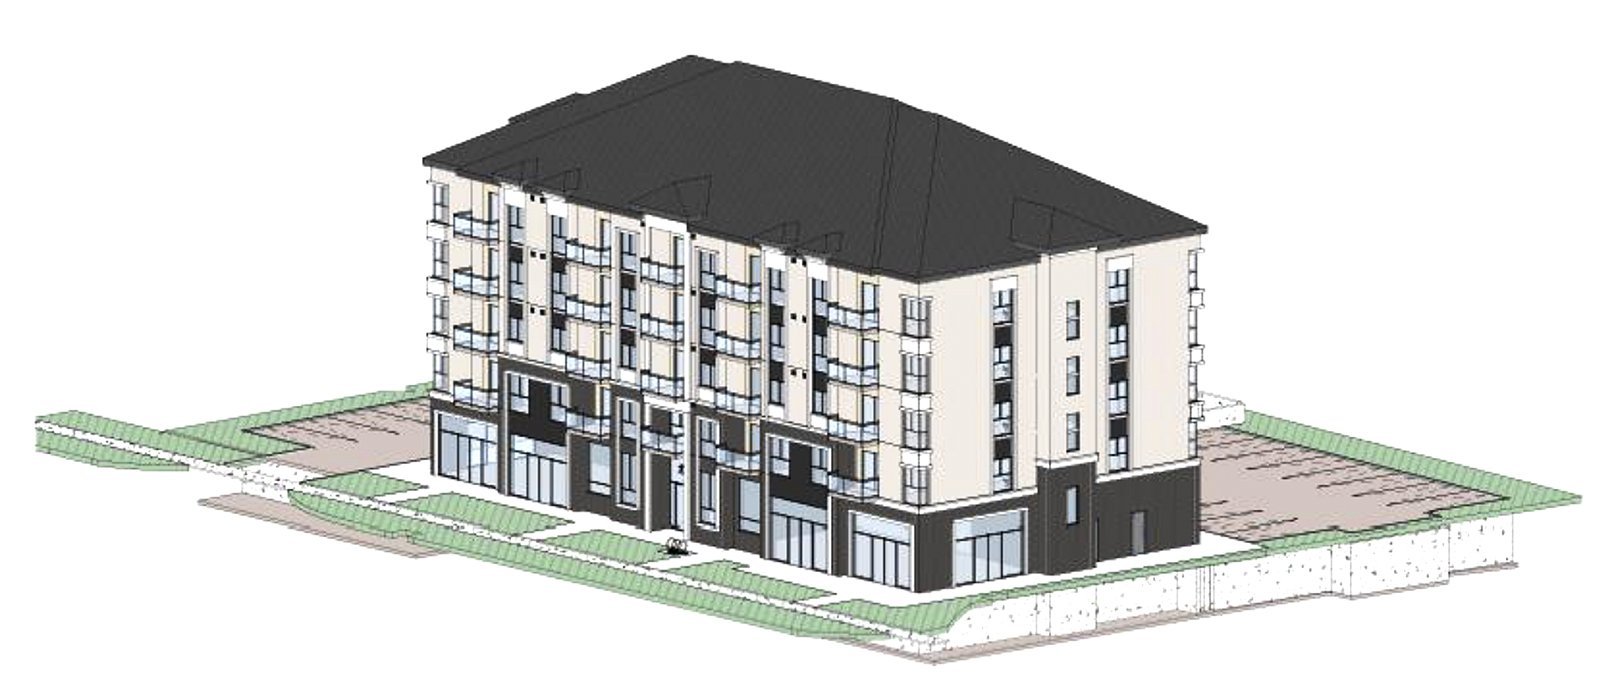 A development at 200 Dundas St. S. includes three commercial units on the ground floor and 40 dwelling units on the upper floors.